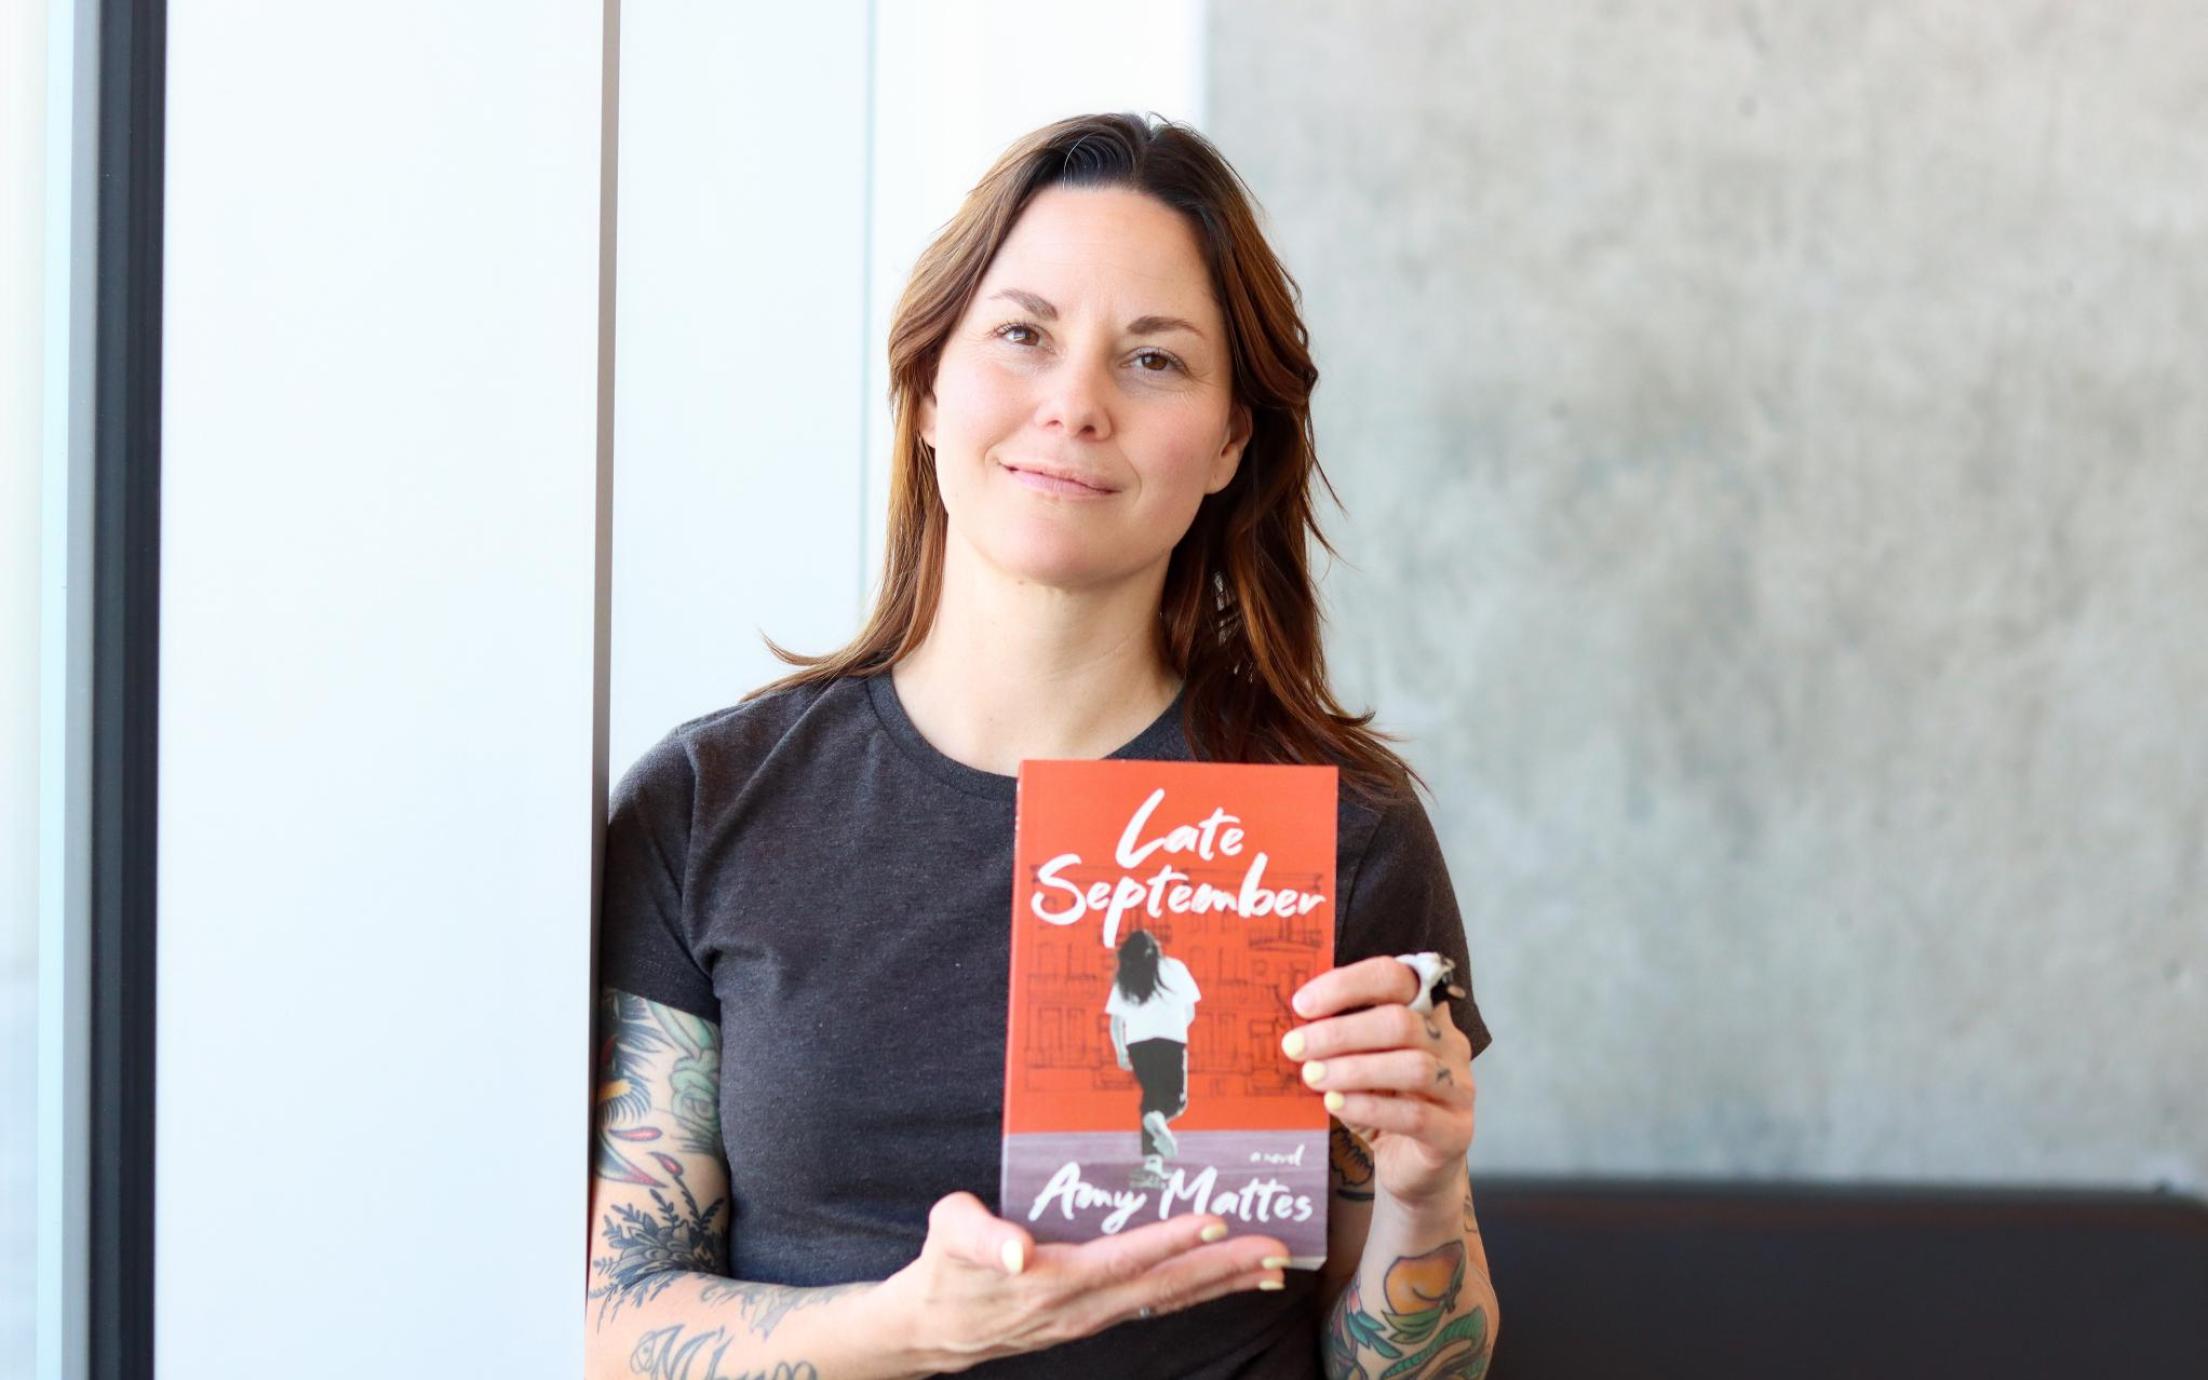 Amy Mattes holds up a copy of her book, Late September.